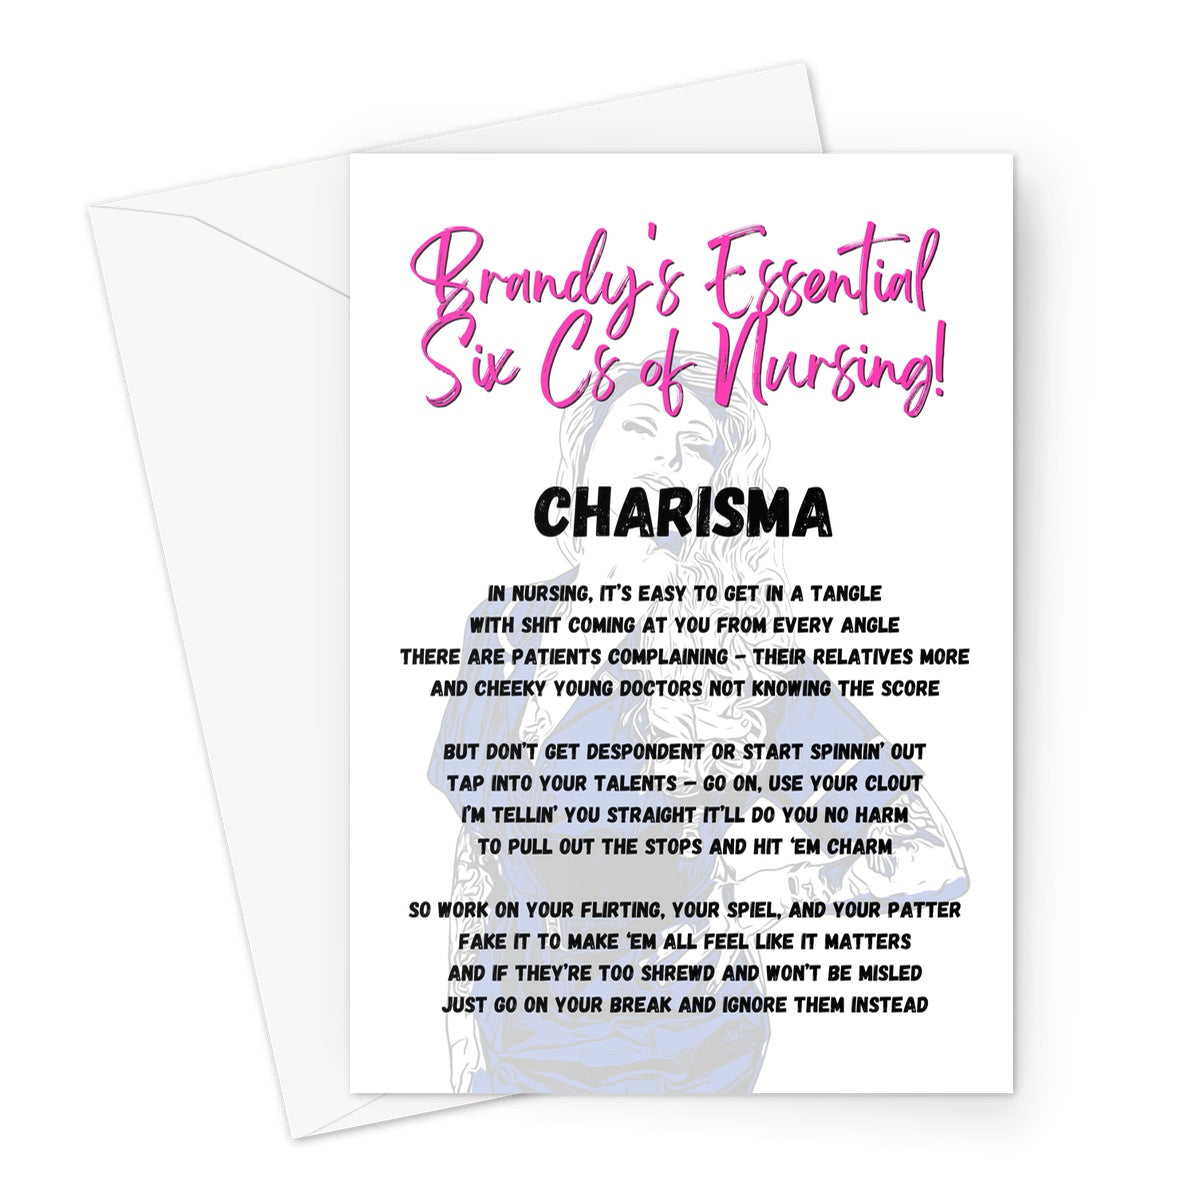 Blank greeting card with a verse from Brandy Bex's Essential Six Cs of Nursing on the front in black.